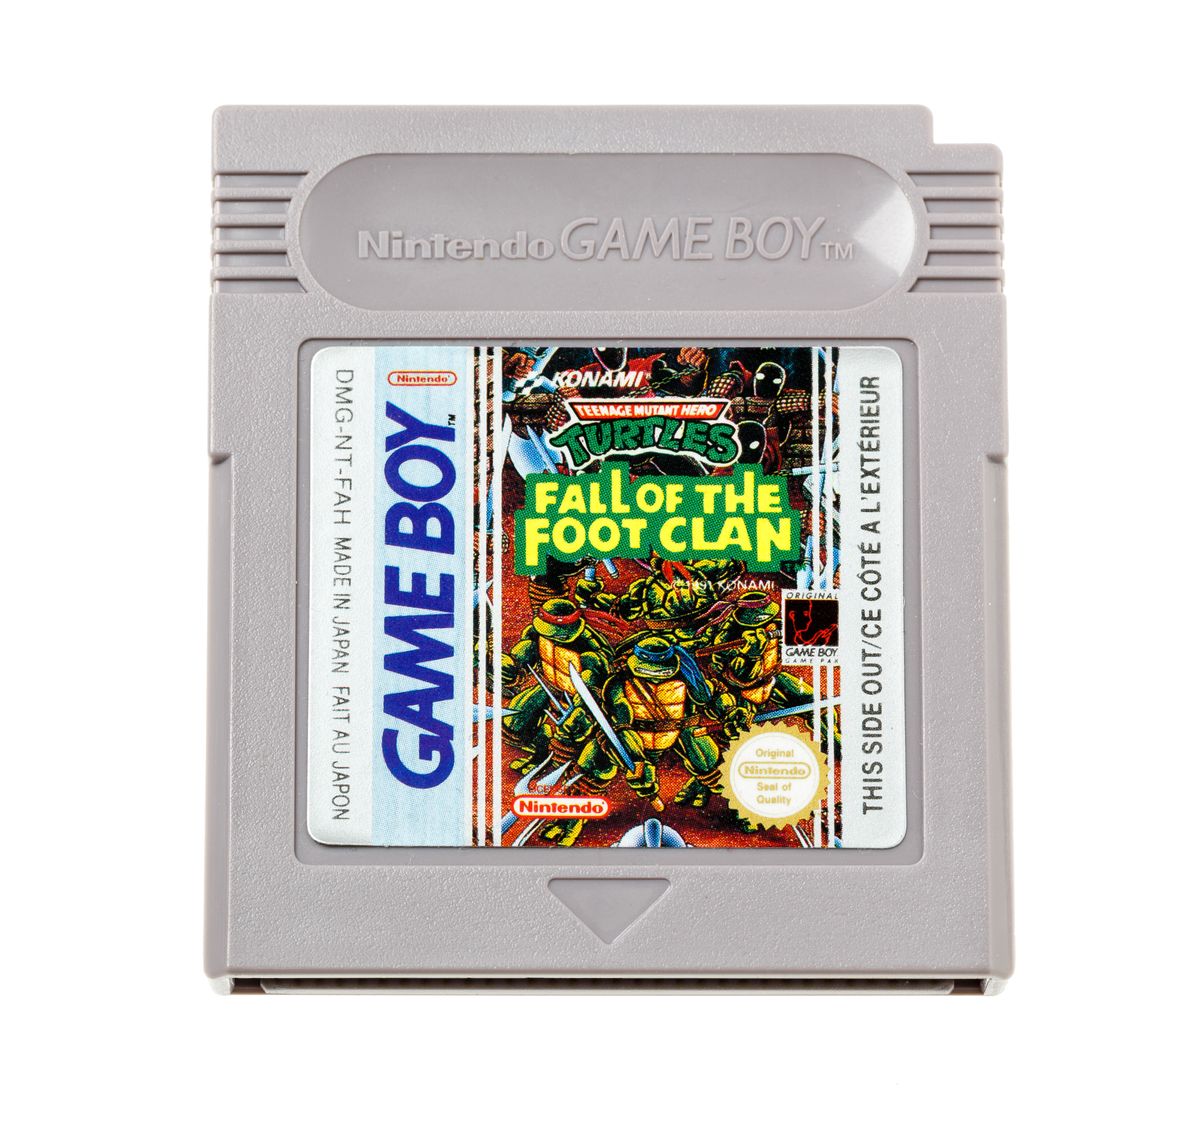 Turtles Fall of the Foot Clan Kopen | Gameboy Classic Games